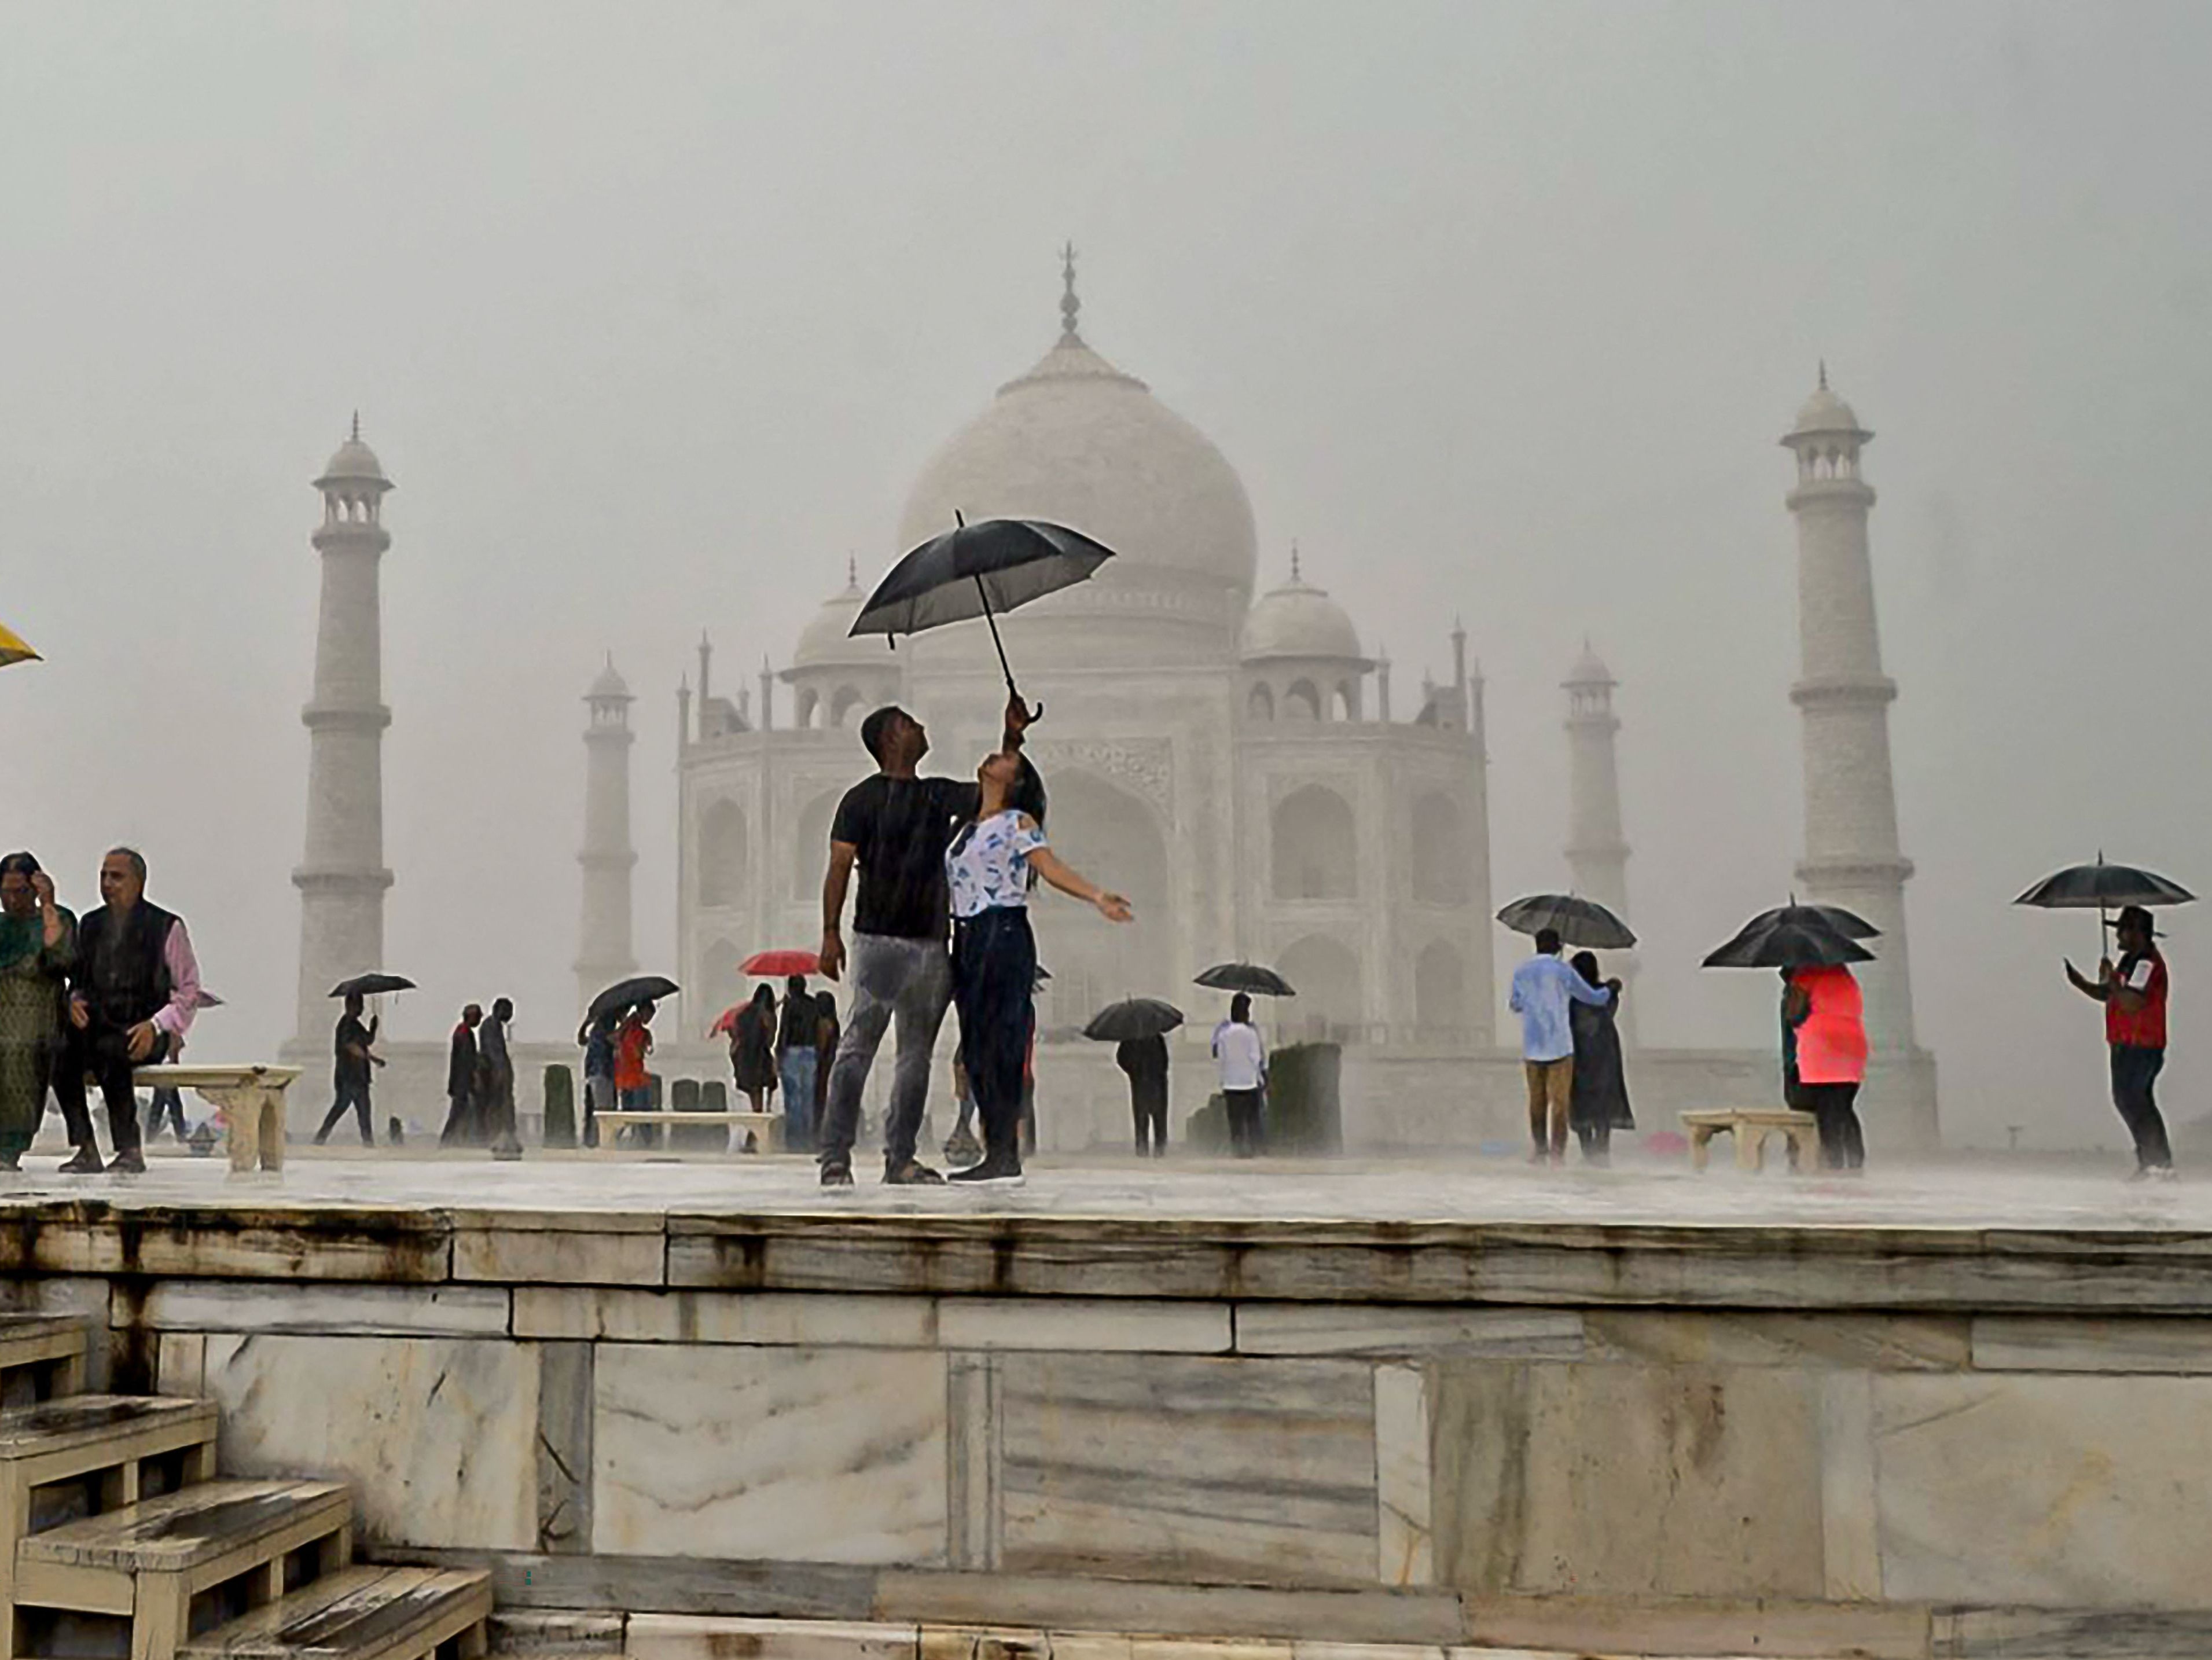 File. The Taj Mahal was the most visited ticketed monument by domestic visitors at about 3.3 million in financial year 2022, according to Statista